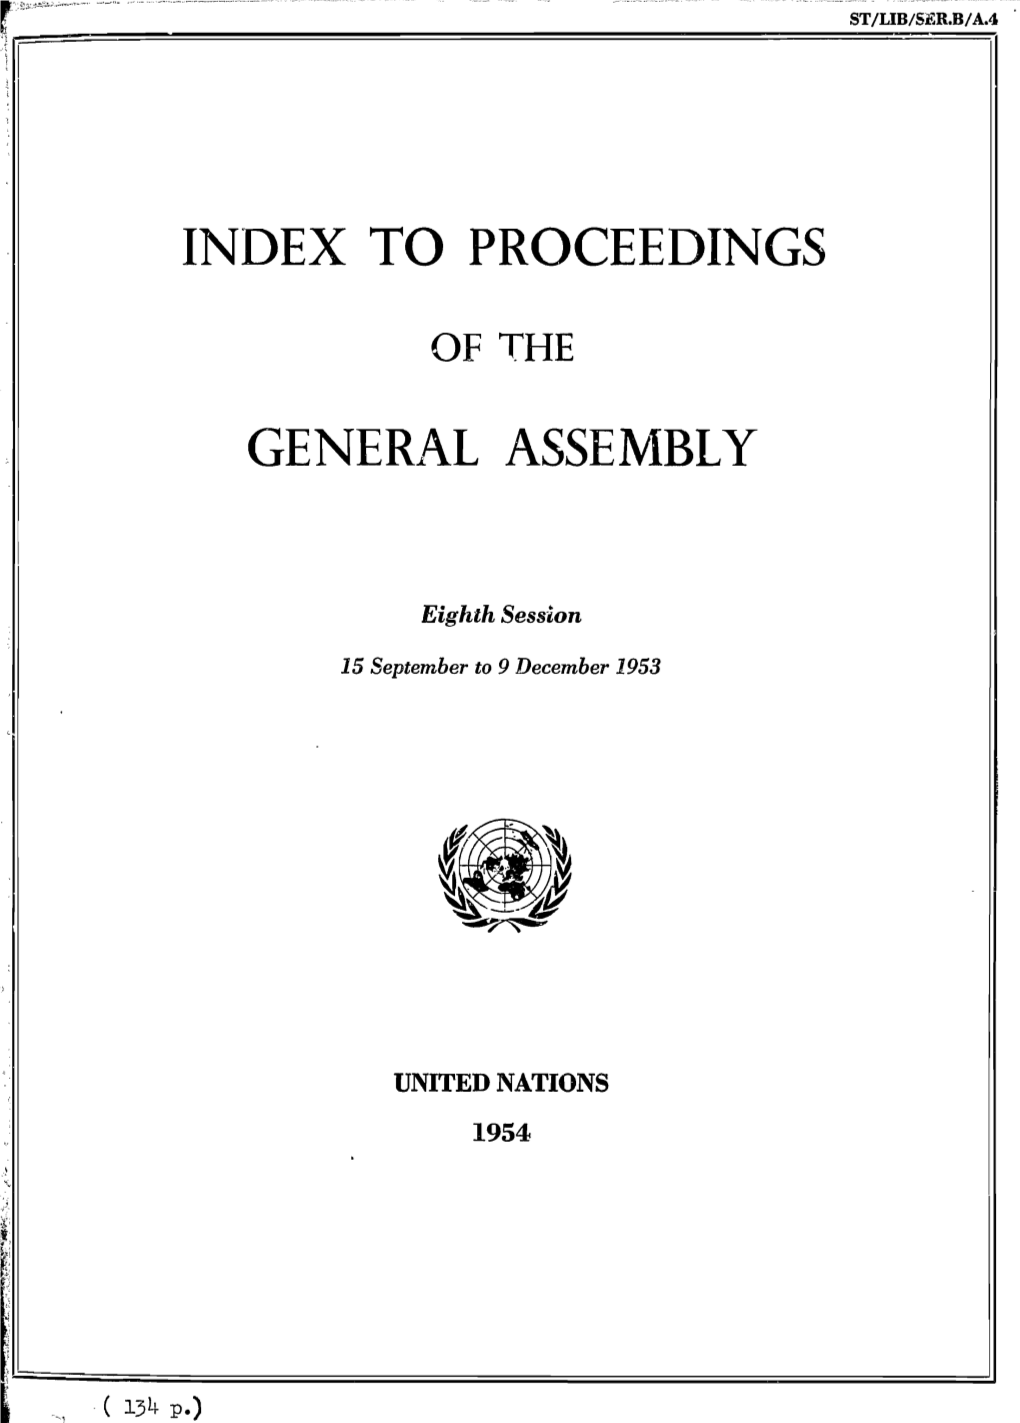 Index to Proceedings of the General Assembly, 8Th Session, 1953